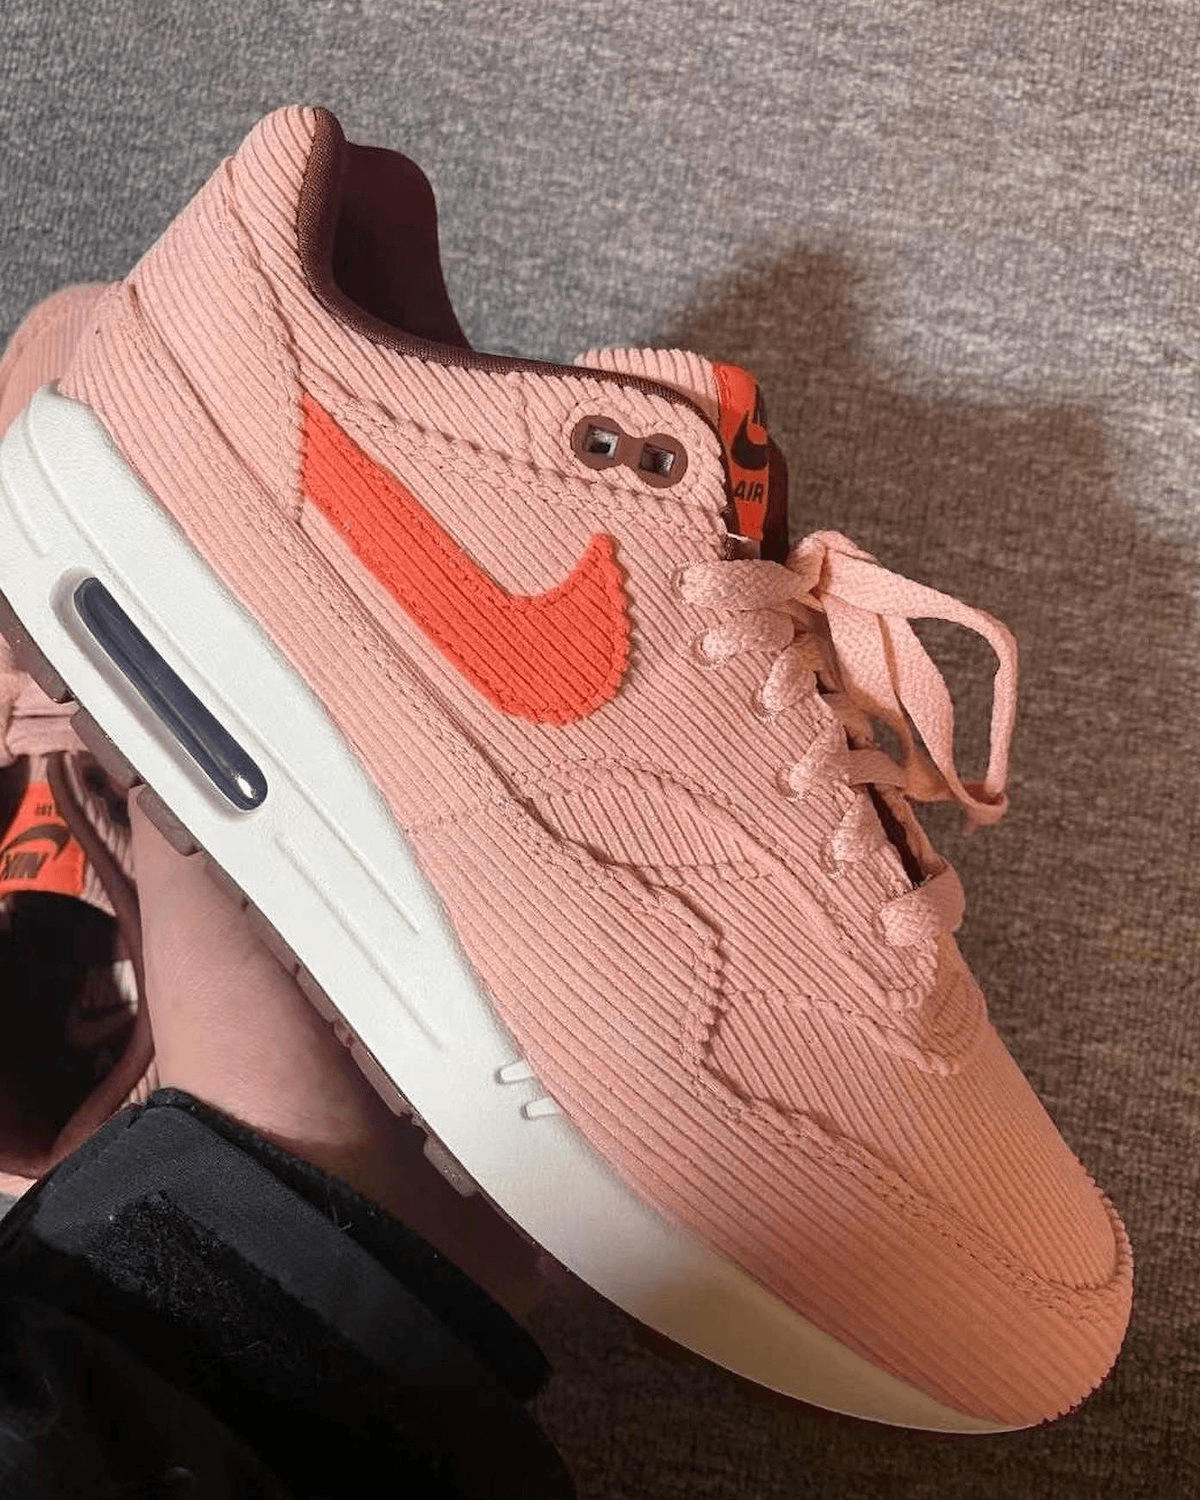 First Look At The Nike Air Max 1 PRM “Coral Stardust”